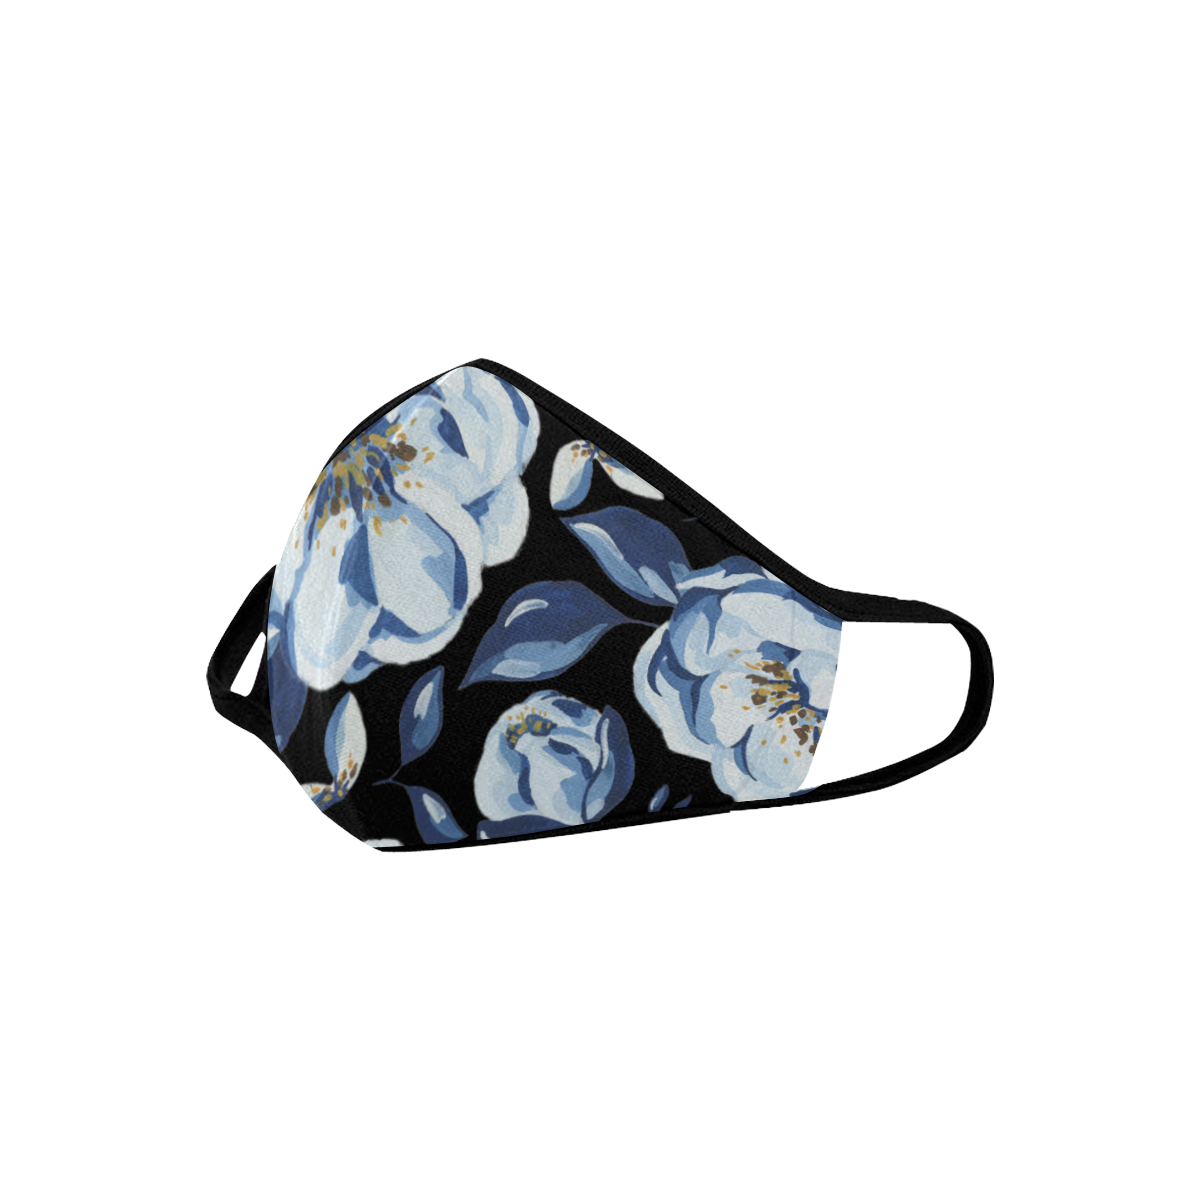 Blue Floral Mouth Mask Mouth Mask